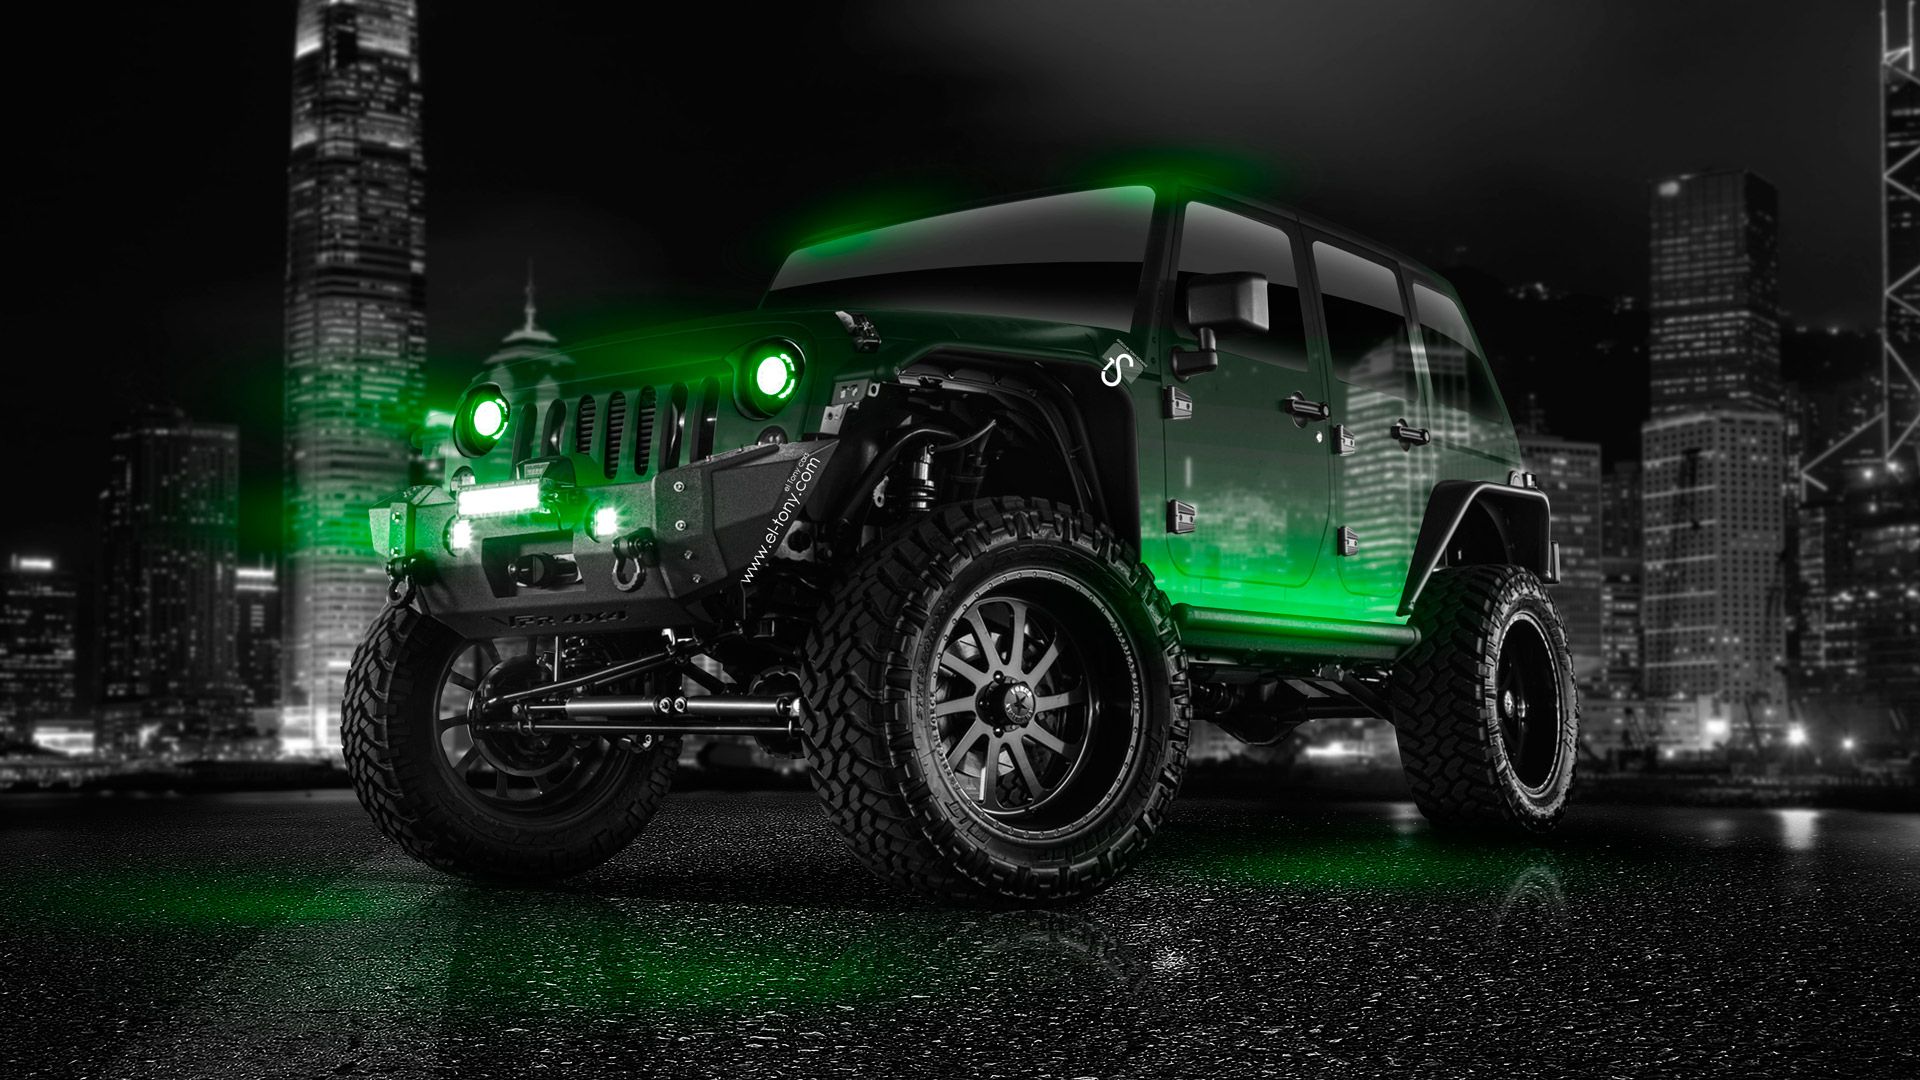 Jeep Wrangler Wallpaper with Chick